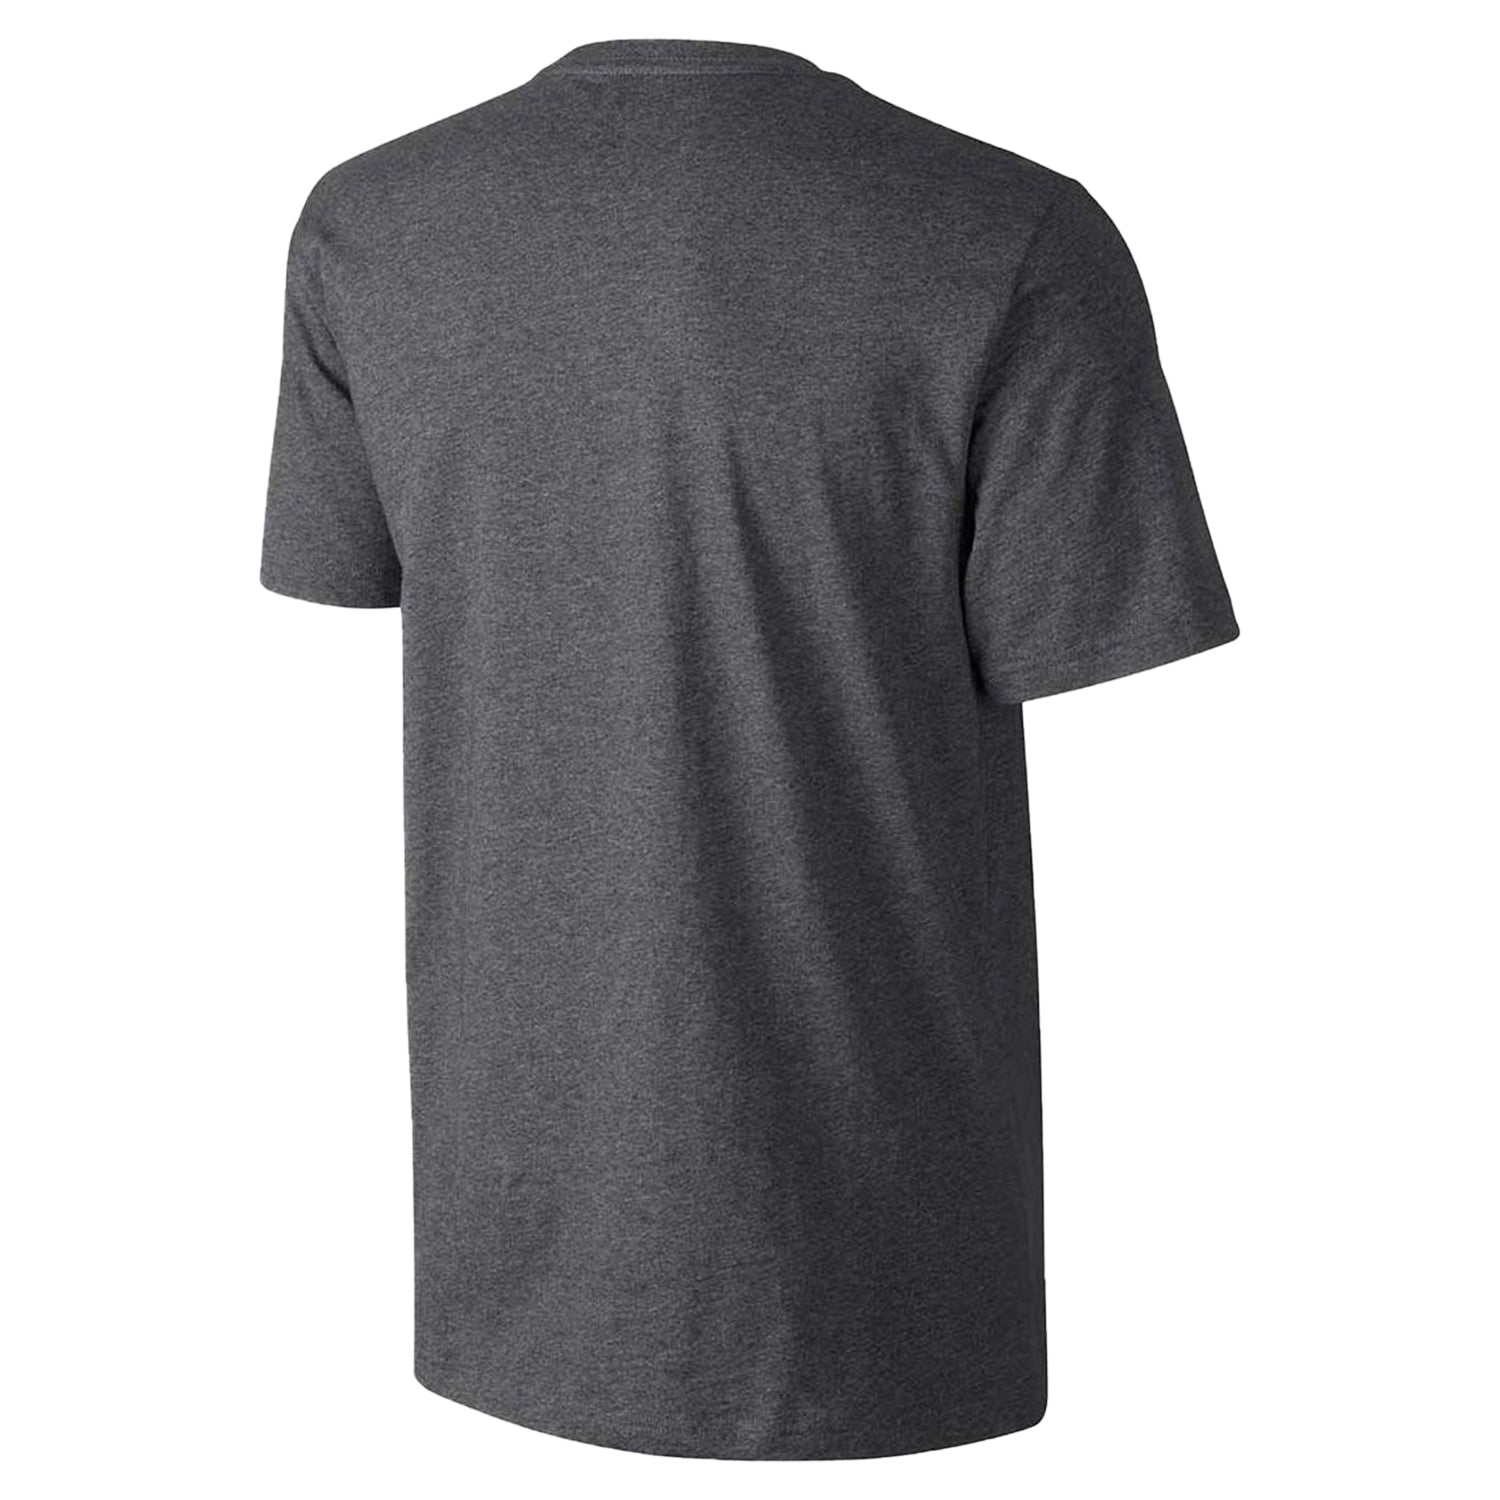 Nike Some Things T-shirt Mens Style : 559394